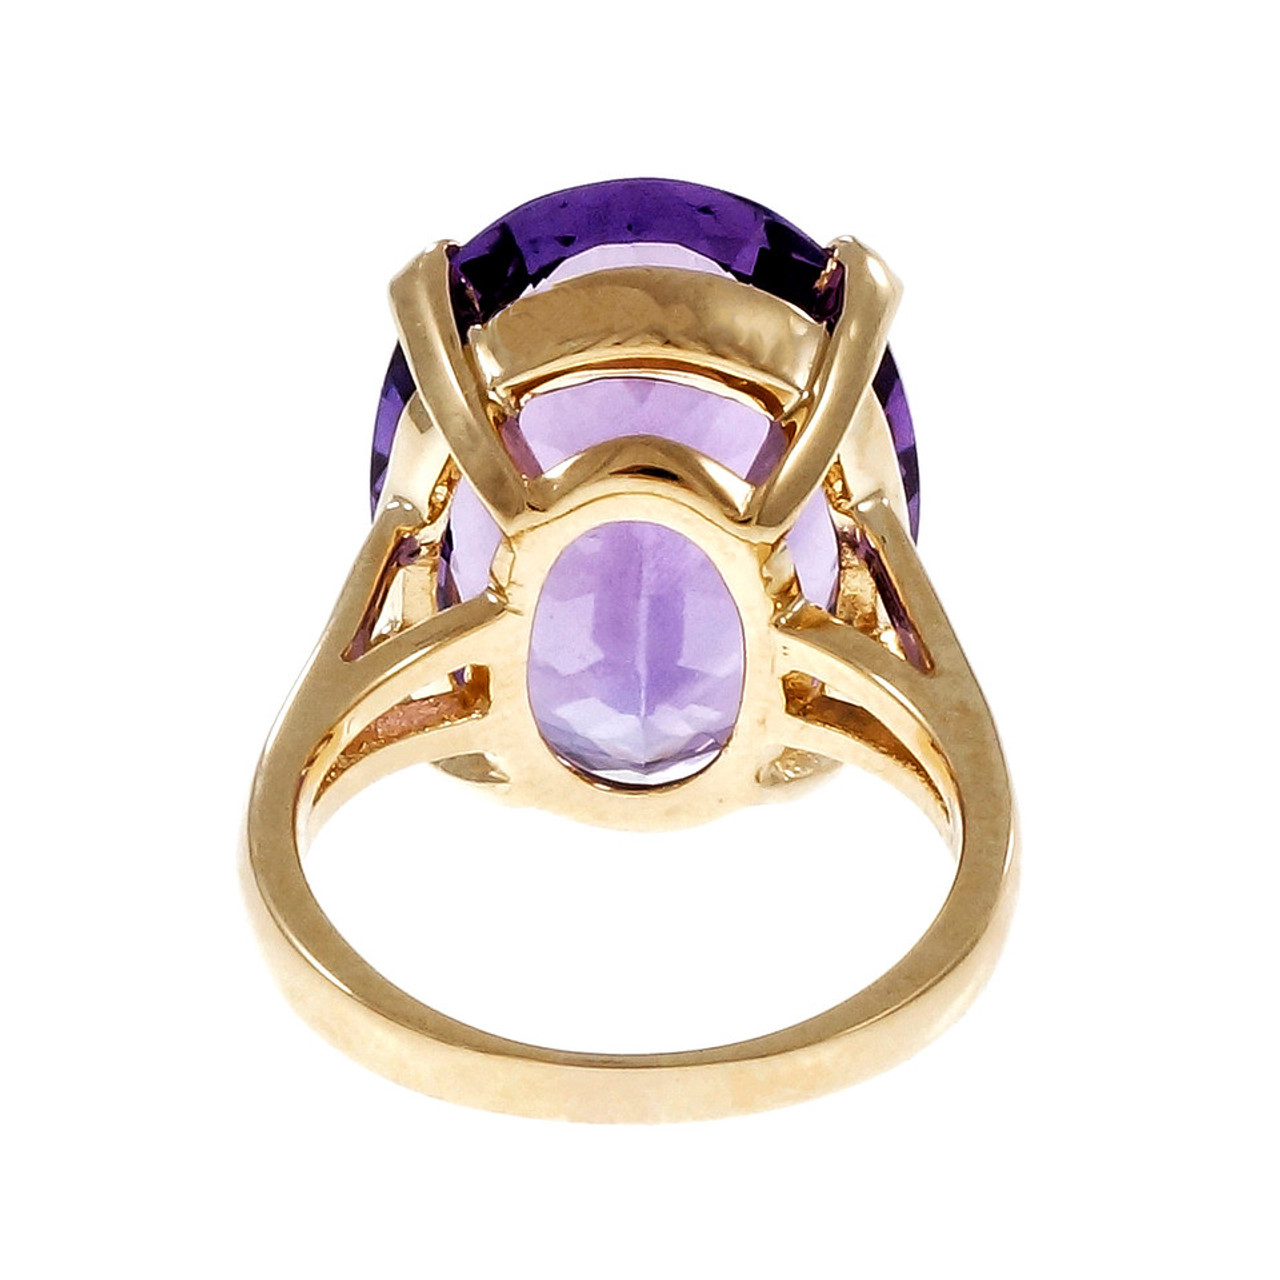 Estate Large Oval Amethyst Ring 14k Yellow Gold - petersuchyjewelers